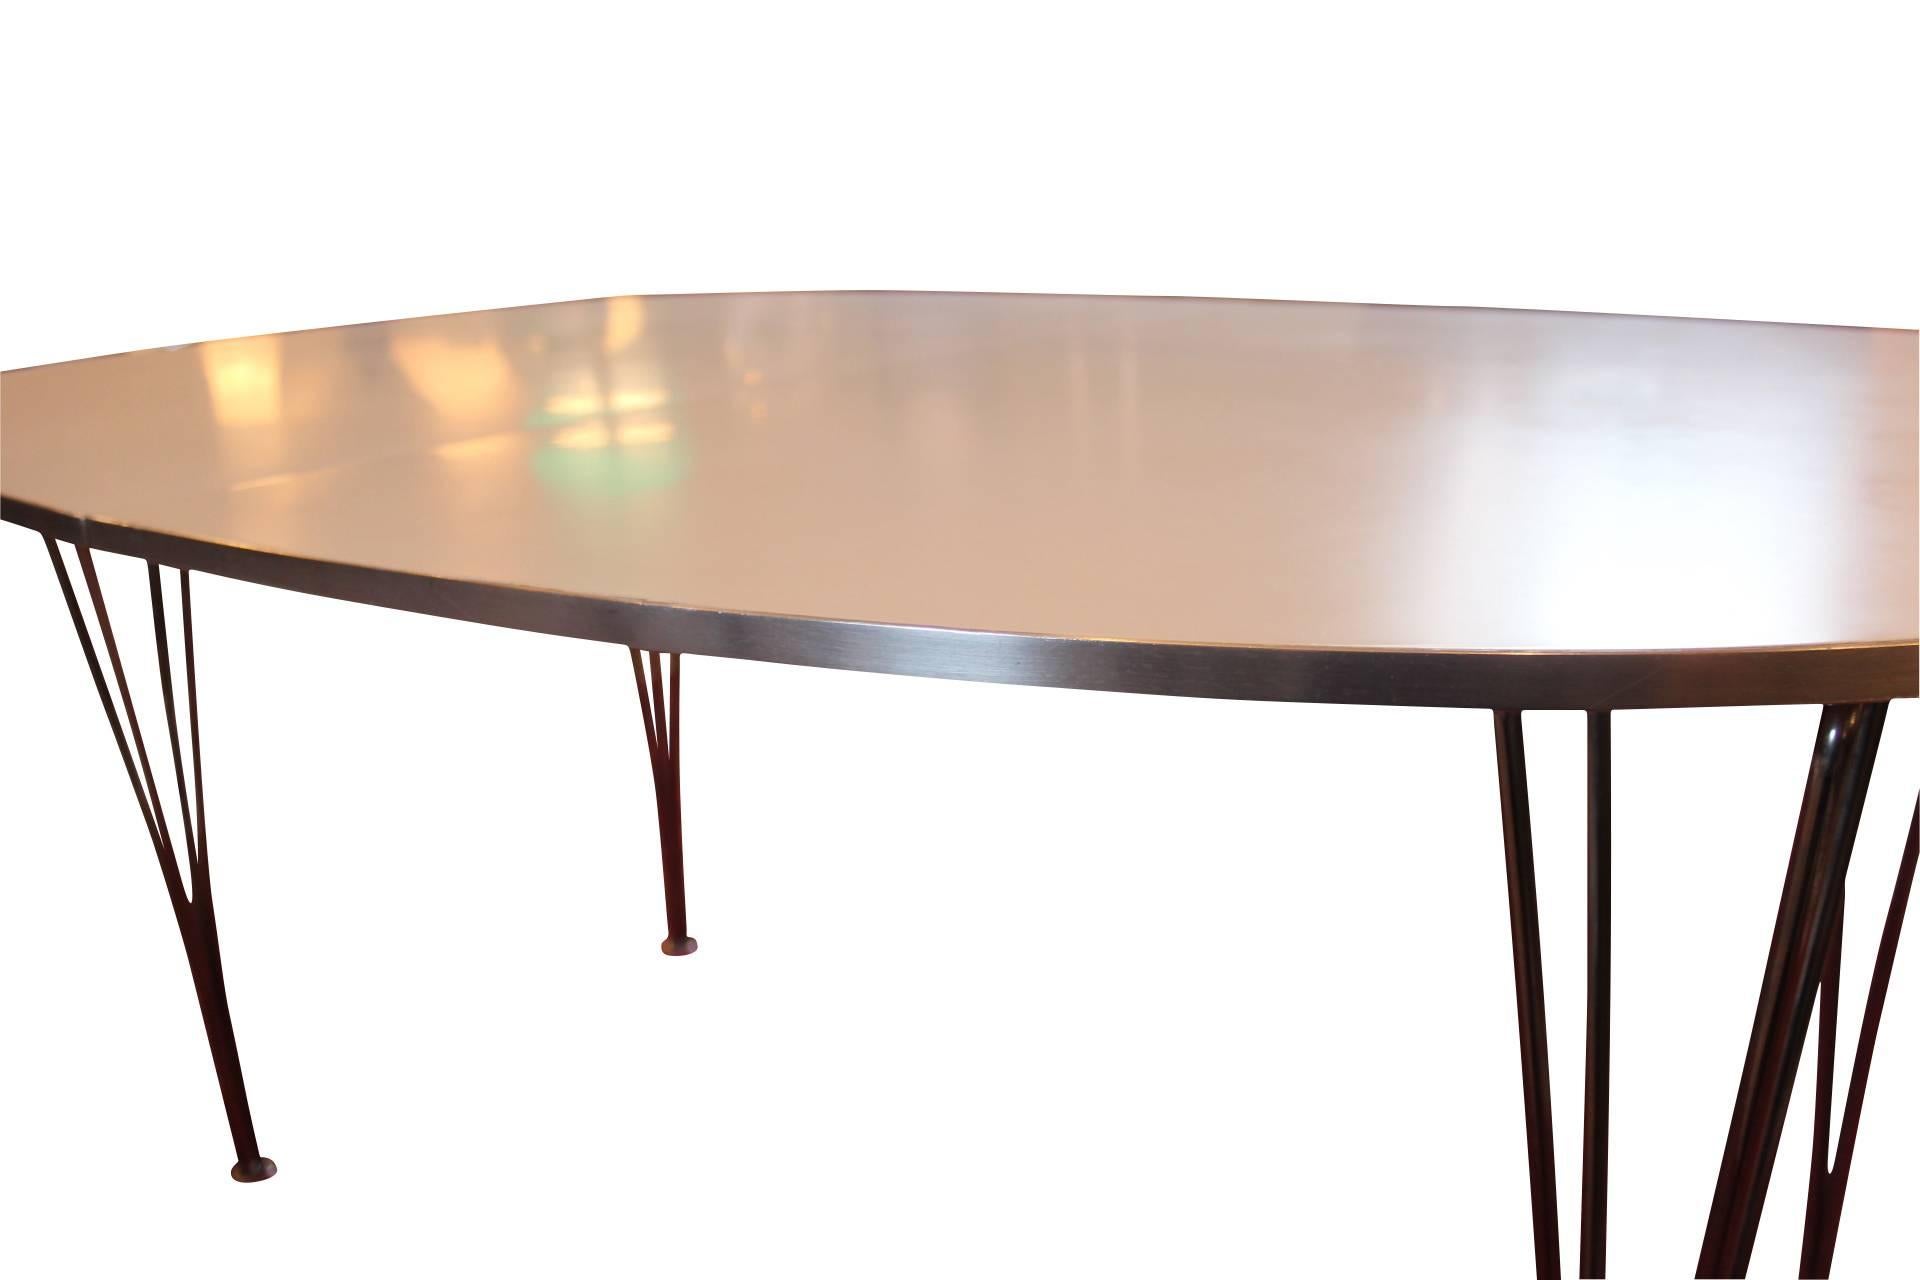 Plated Extension Table, B618, by Piet Hein and Manufactured by Fritz Hansen from 2004 For Sale